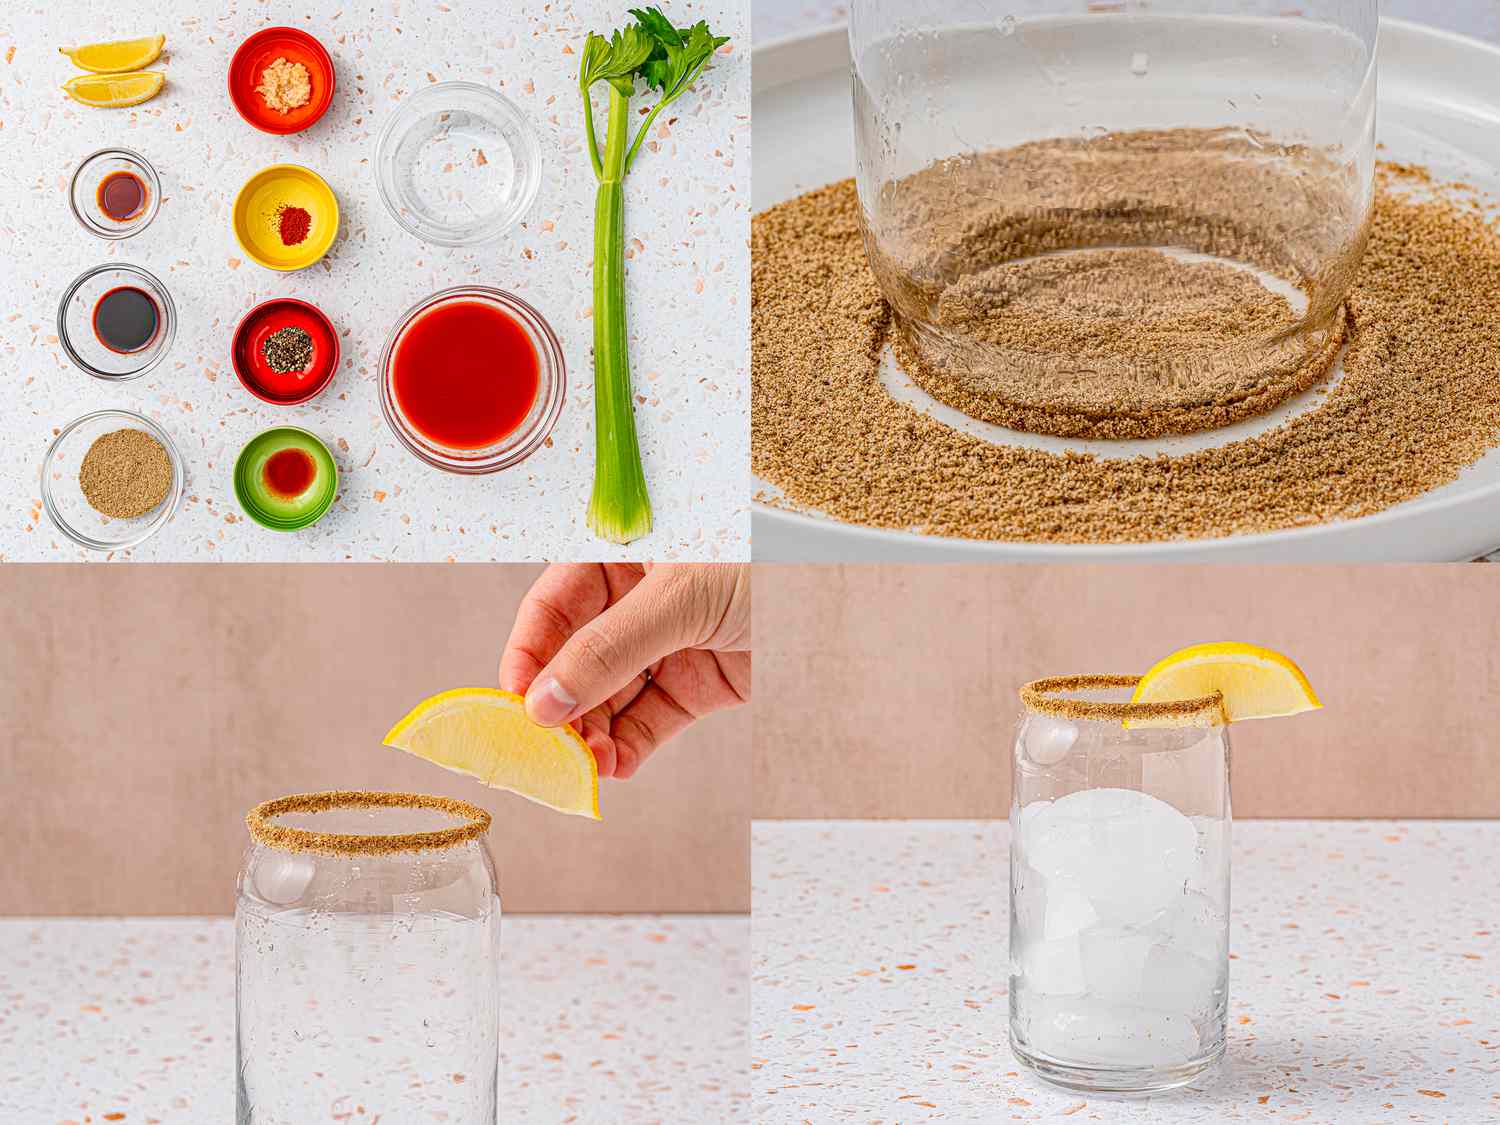 Four image collage of ingredients and prep steps for bloody mary